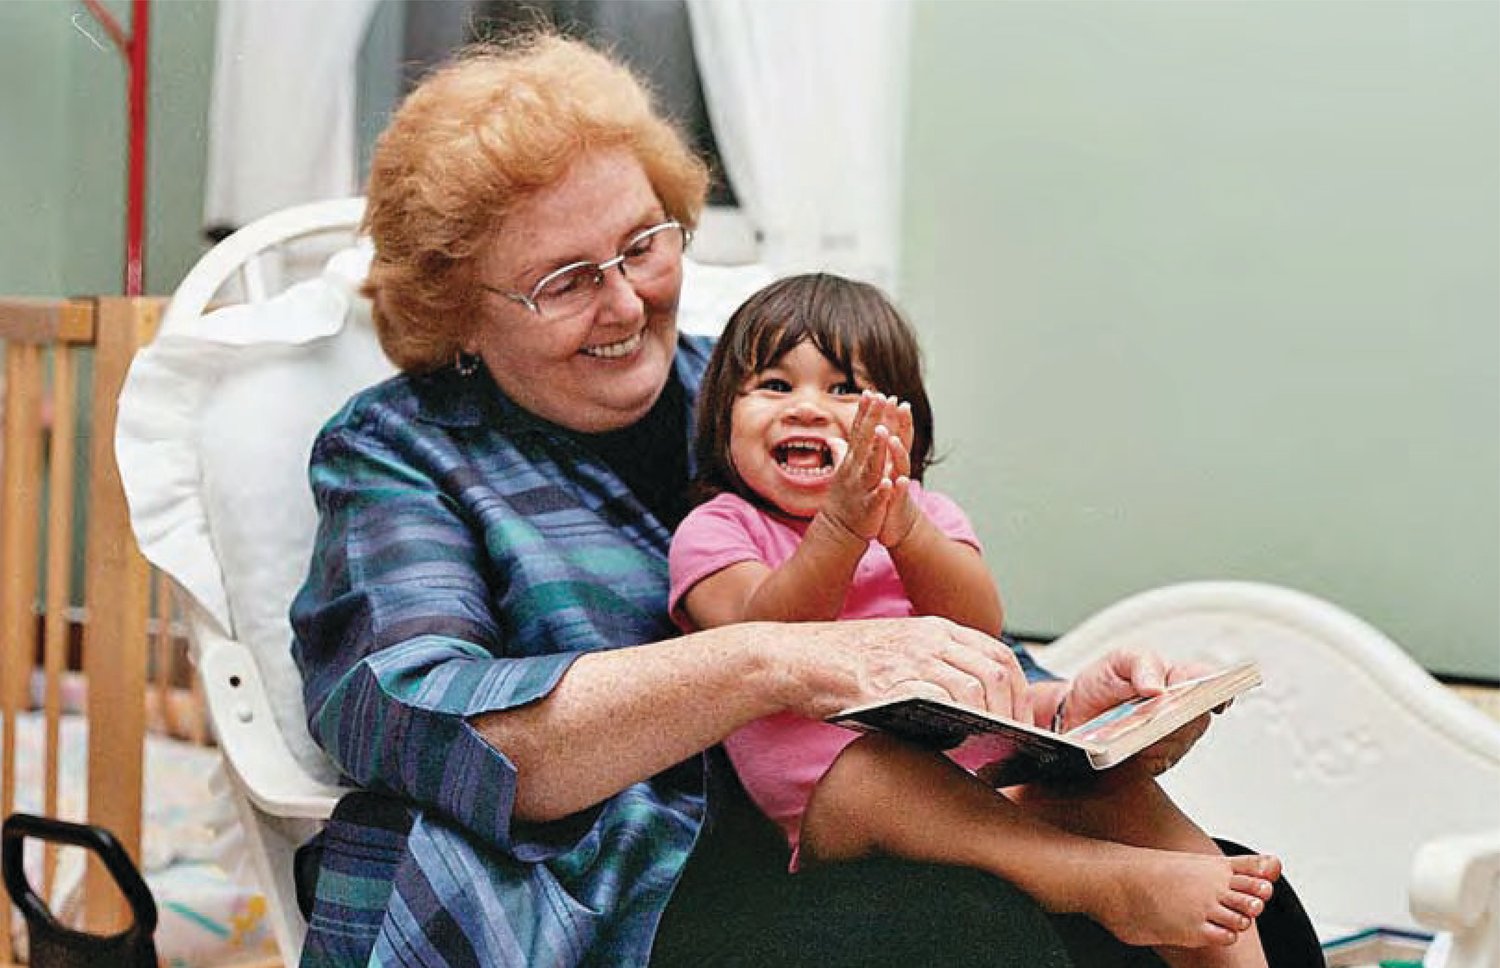 Pat Shea recently celebrated helping more than 1,000 mothers and babies across Nassau County.